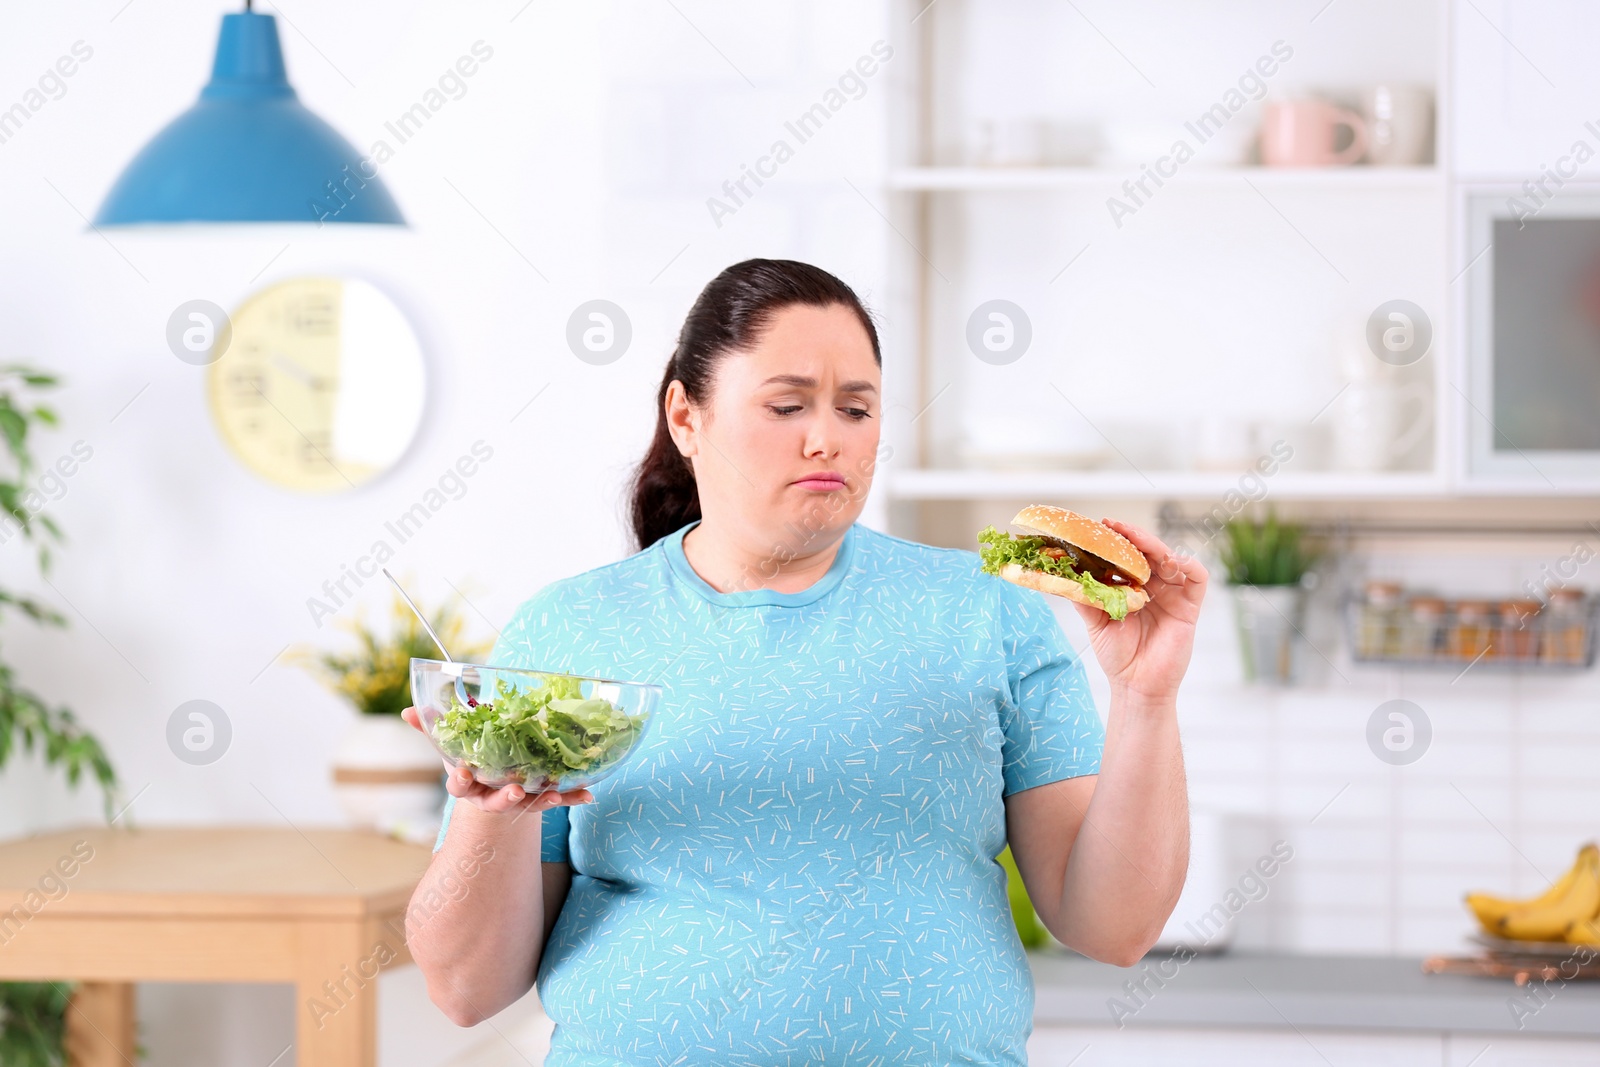 Photo of Sad overweight woman with salad and burger in kitchen. Healthy diet